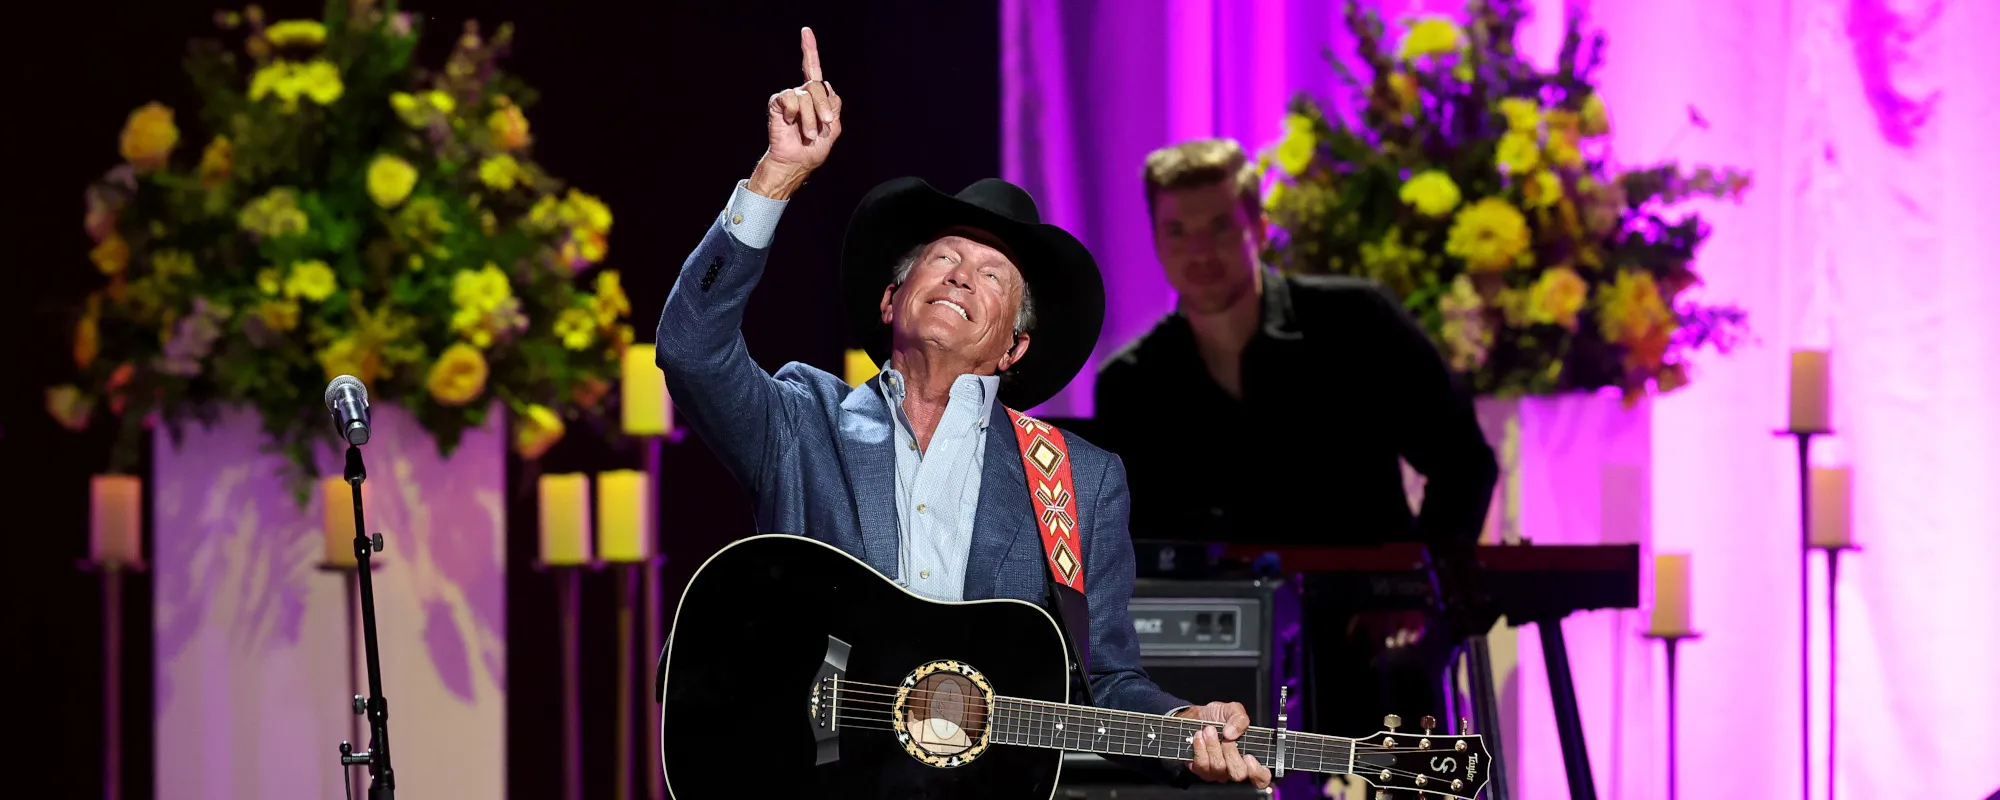 George Strait Teases New Album: “I’m Narrowing Down My Song Choices”